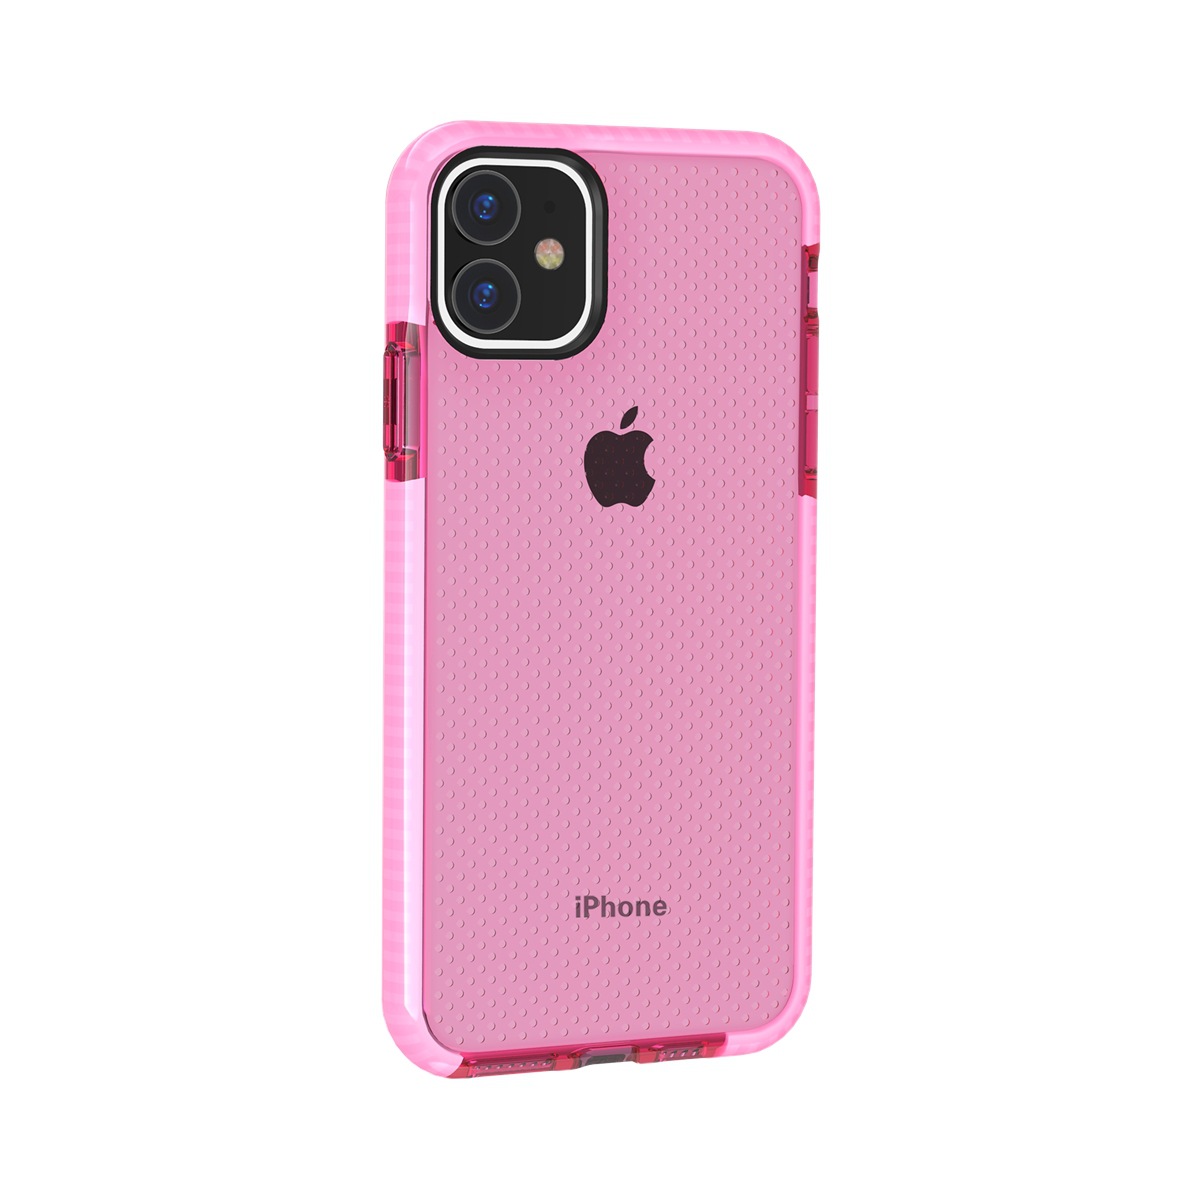 iPHONE 11 Pro Max (6.5in) Mesh Armor Hybrid Case (Hot Pink)